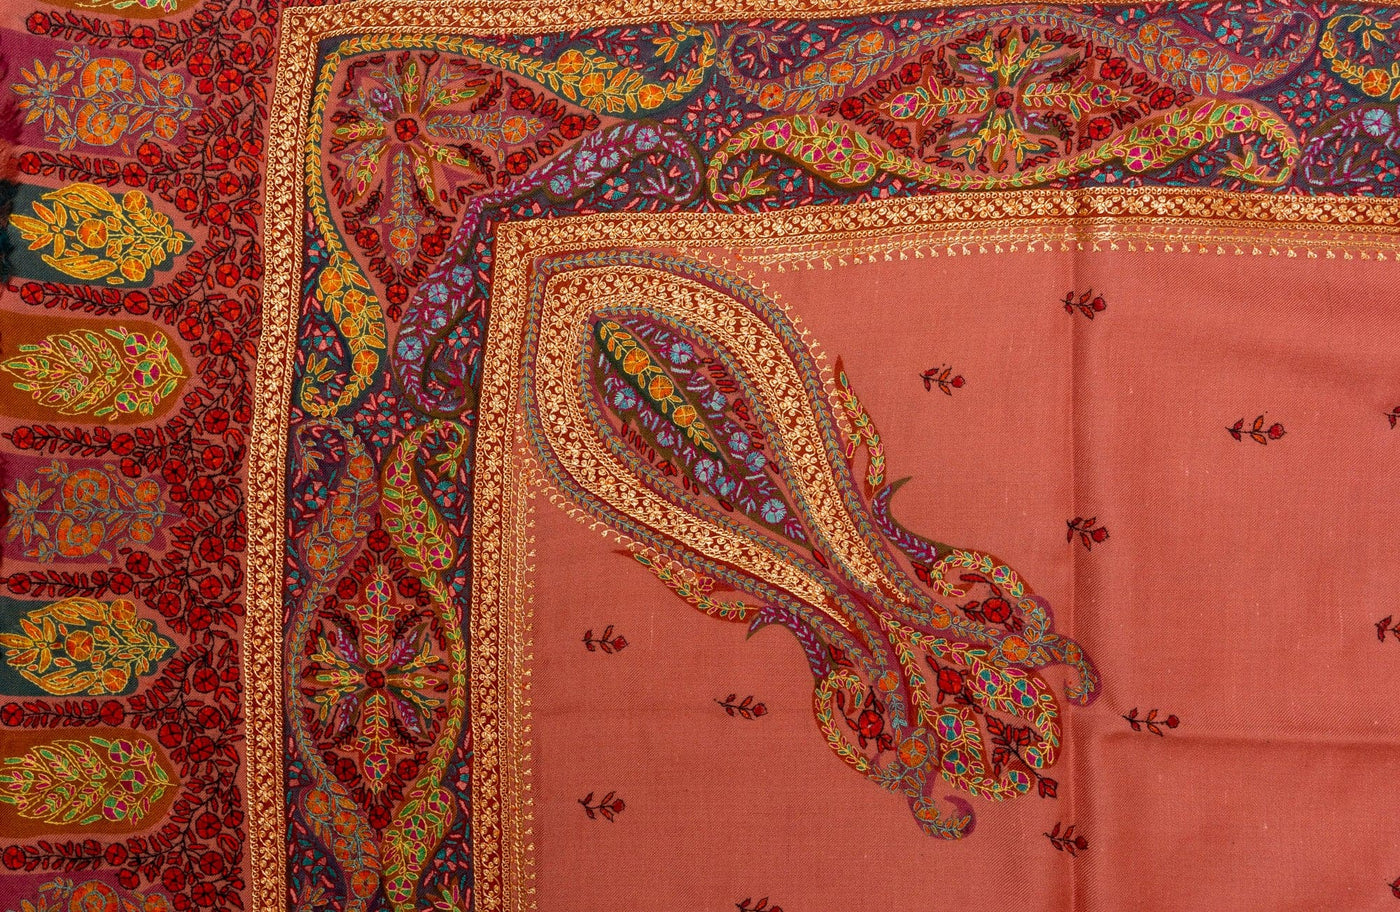 Coral Charm Tilla Tapestry - Hand Embroidered Pashmina Shawl with Tilla and Sozni Embroidery